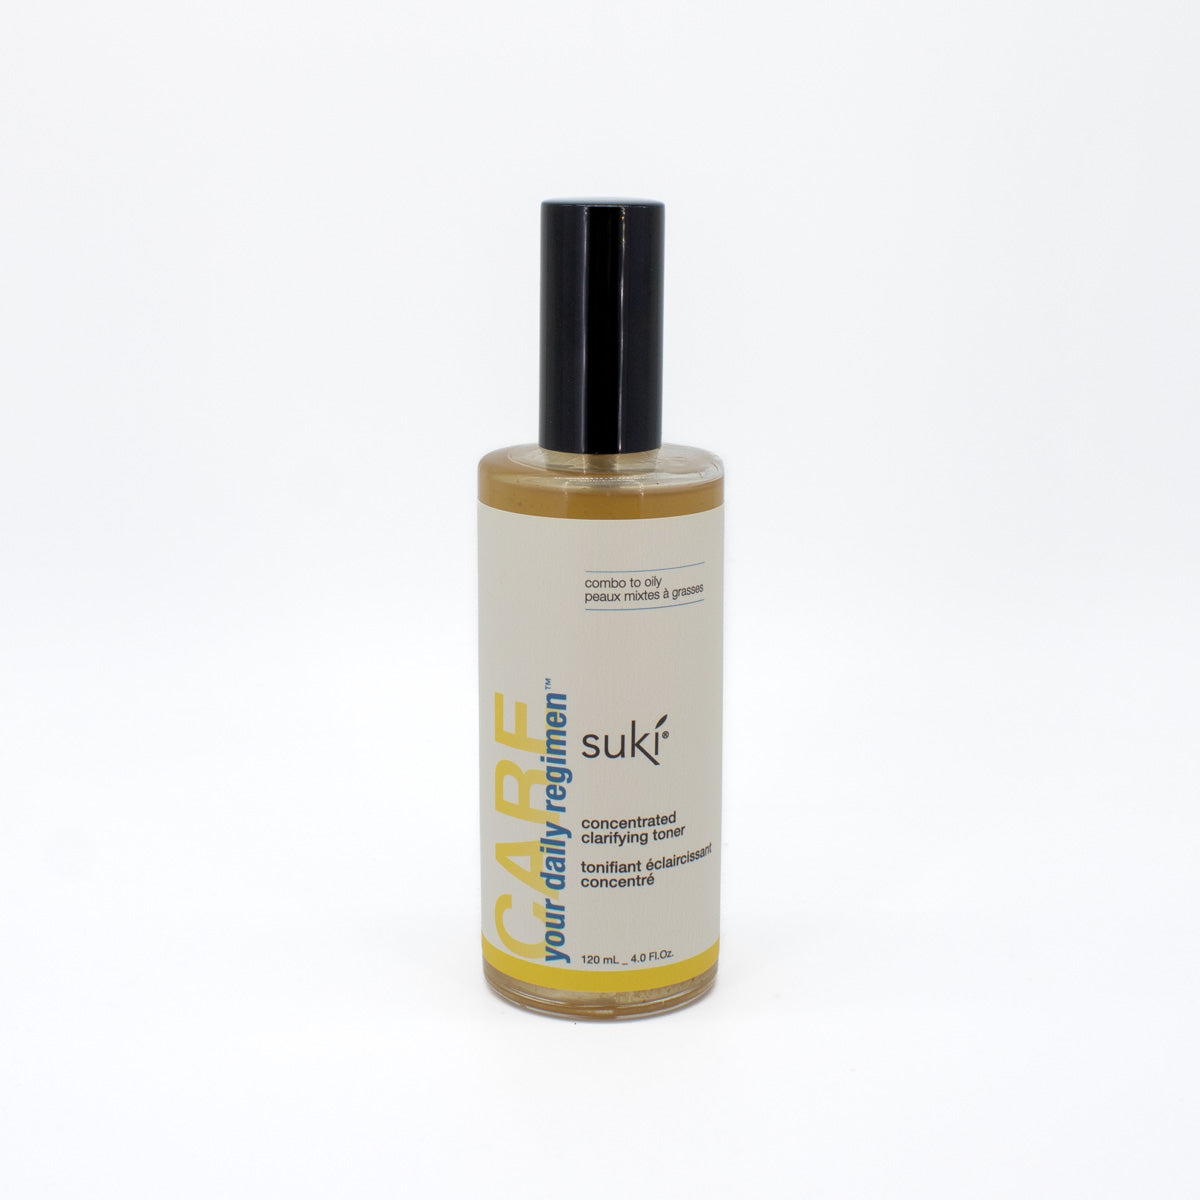 suki Purifying Concentrated Toner Combo to Oily 4oz - Imperfect Box